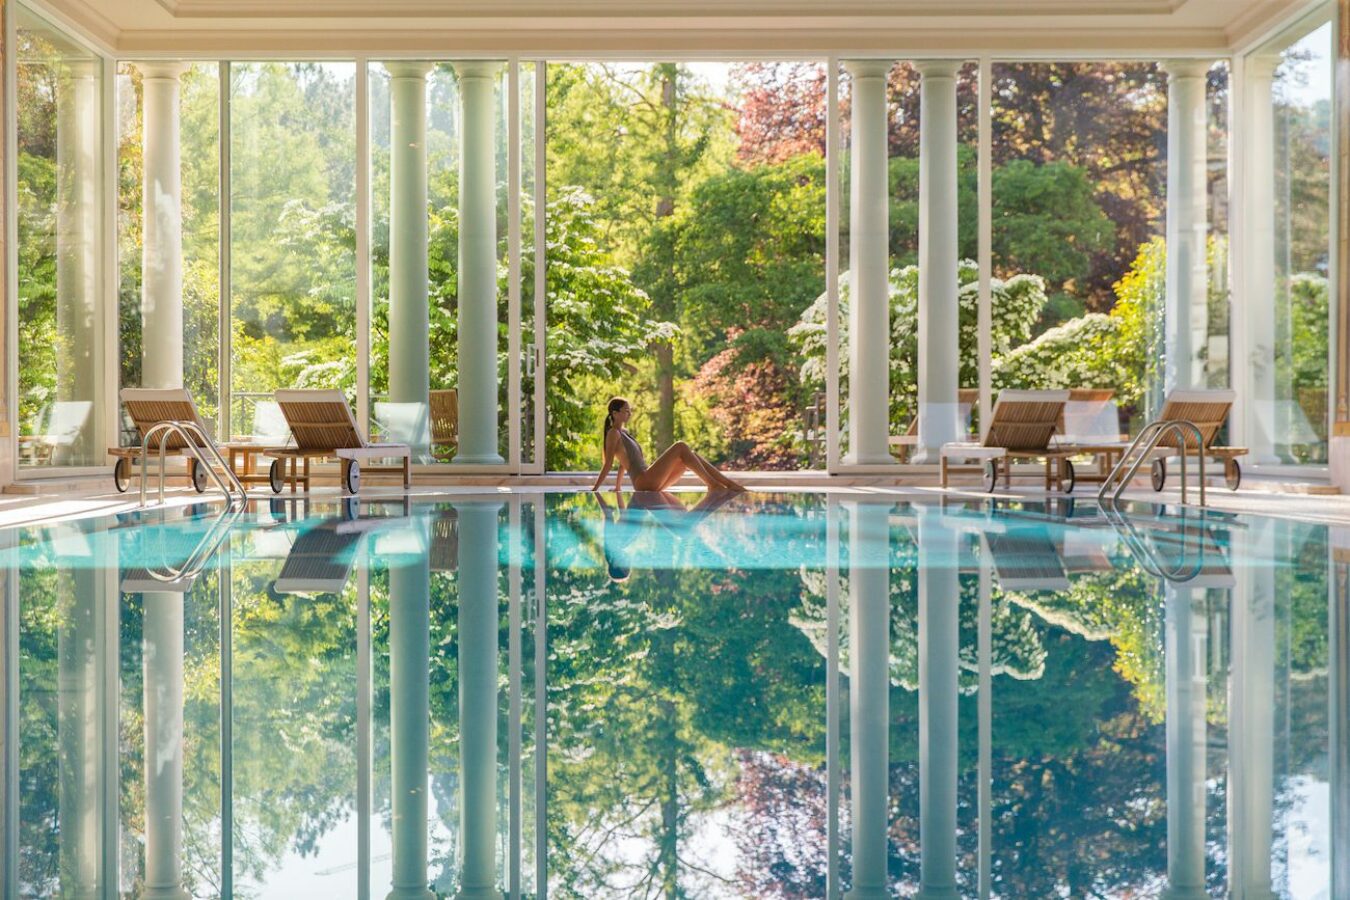 Review - We Check in to Villa Stephanie, Baden Baden, Germany